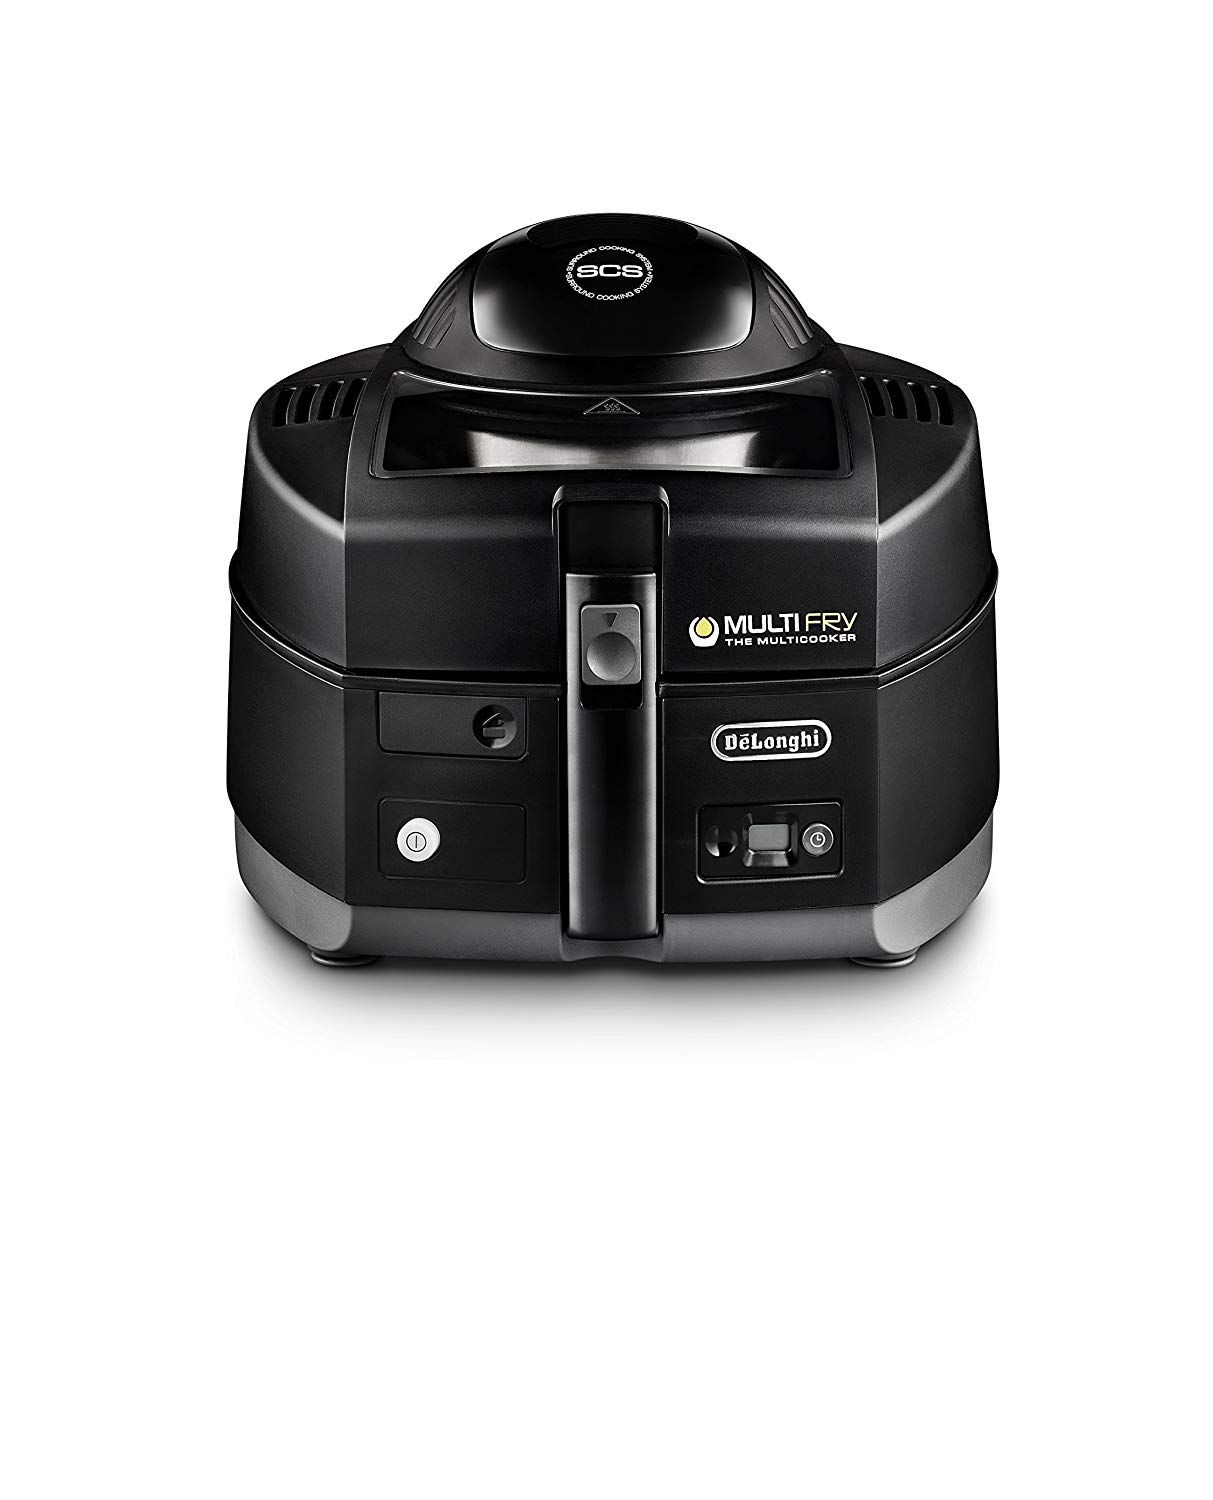 https://airfryer.net/public/images/417186185DeLonghi-America-FH1130-Air-Fryer-and-Multi-Cooker.jpg